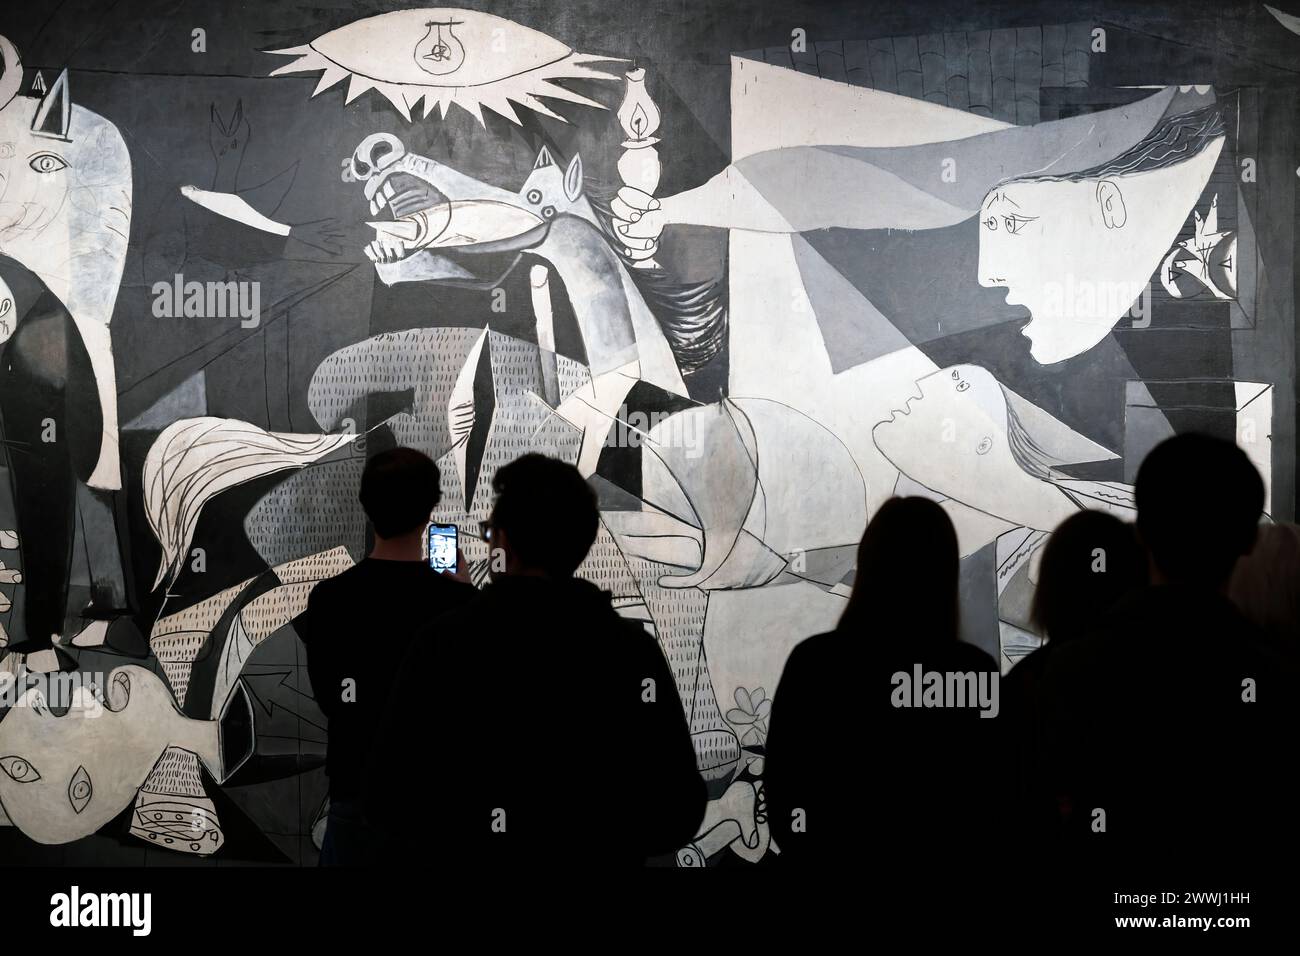 Visitors watching the 'Guernica' oil painting by Spanish artist Pablo Picasso, Reina Sofia museum, Madrid, Spain Stock Photo